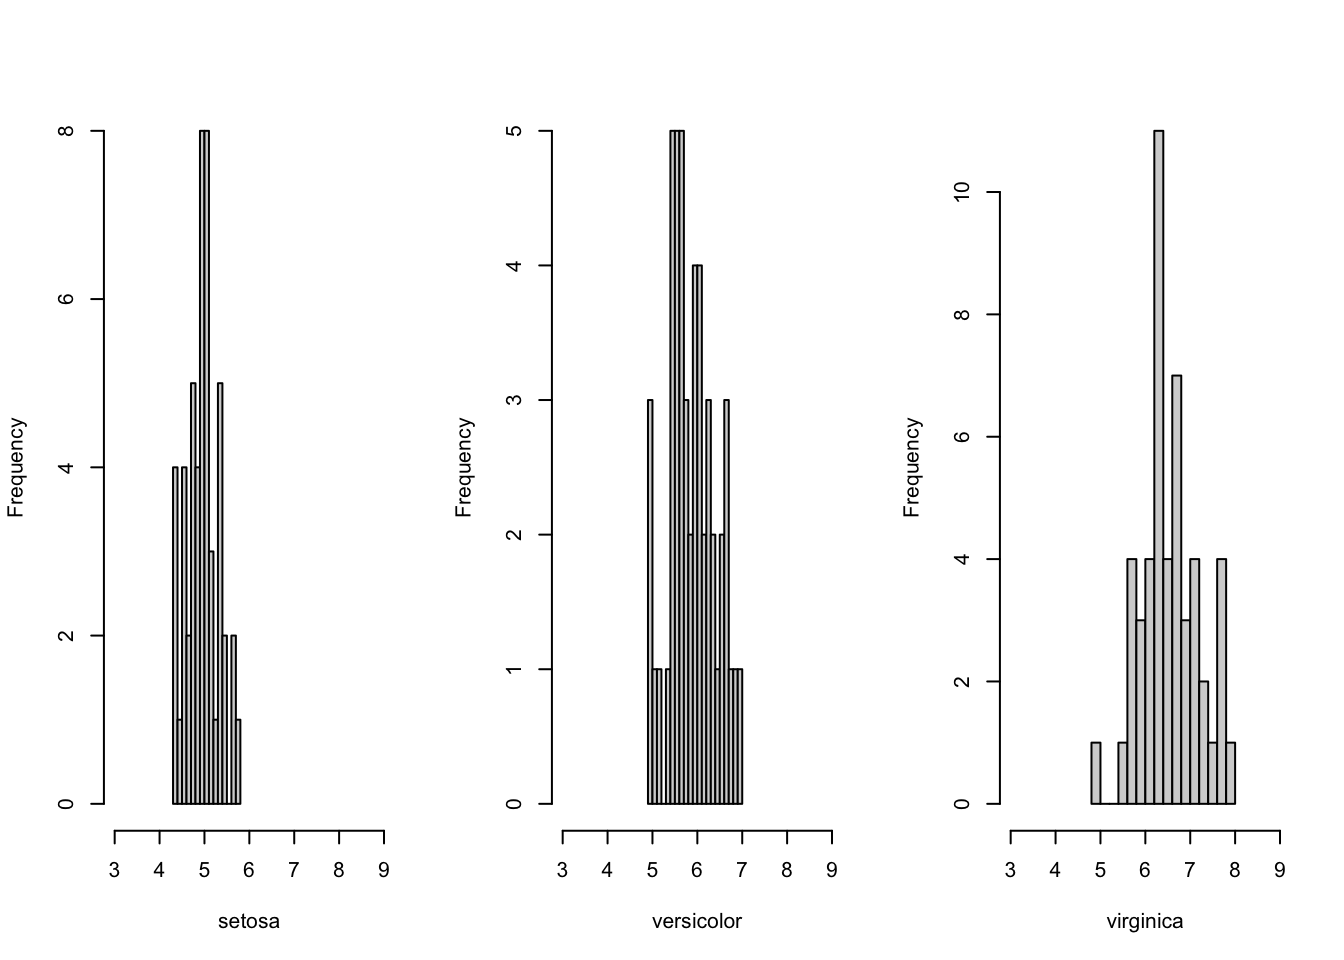 Histograms of sepal length for each species.